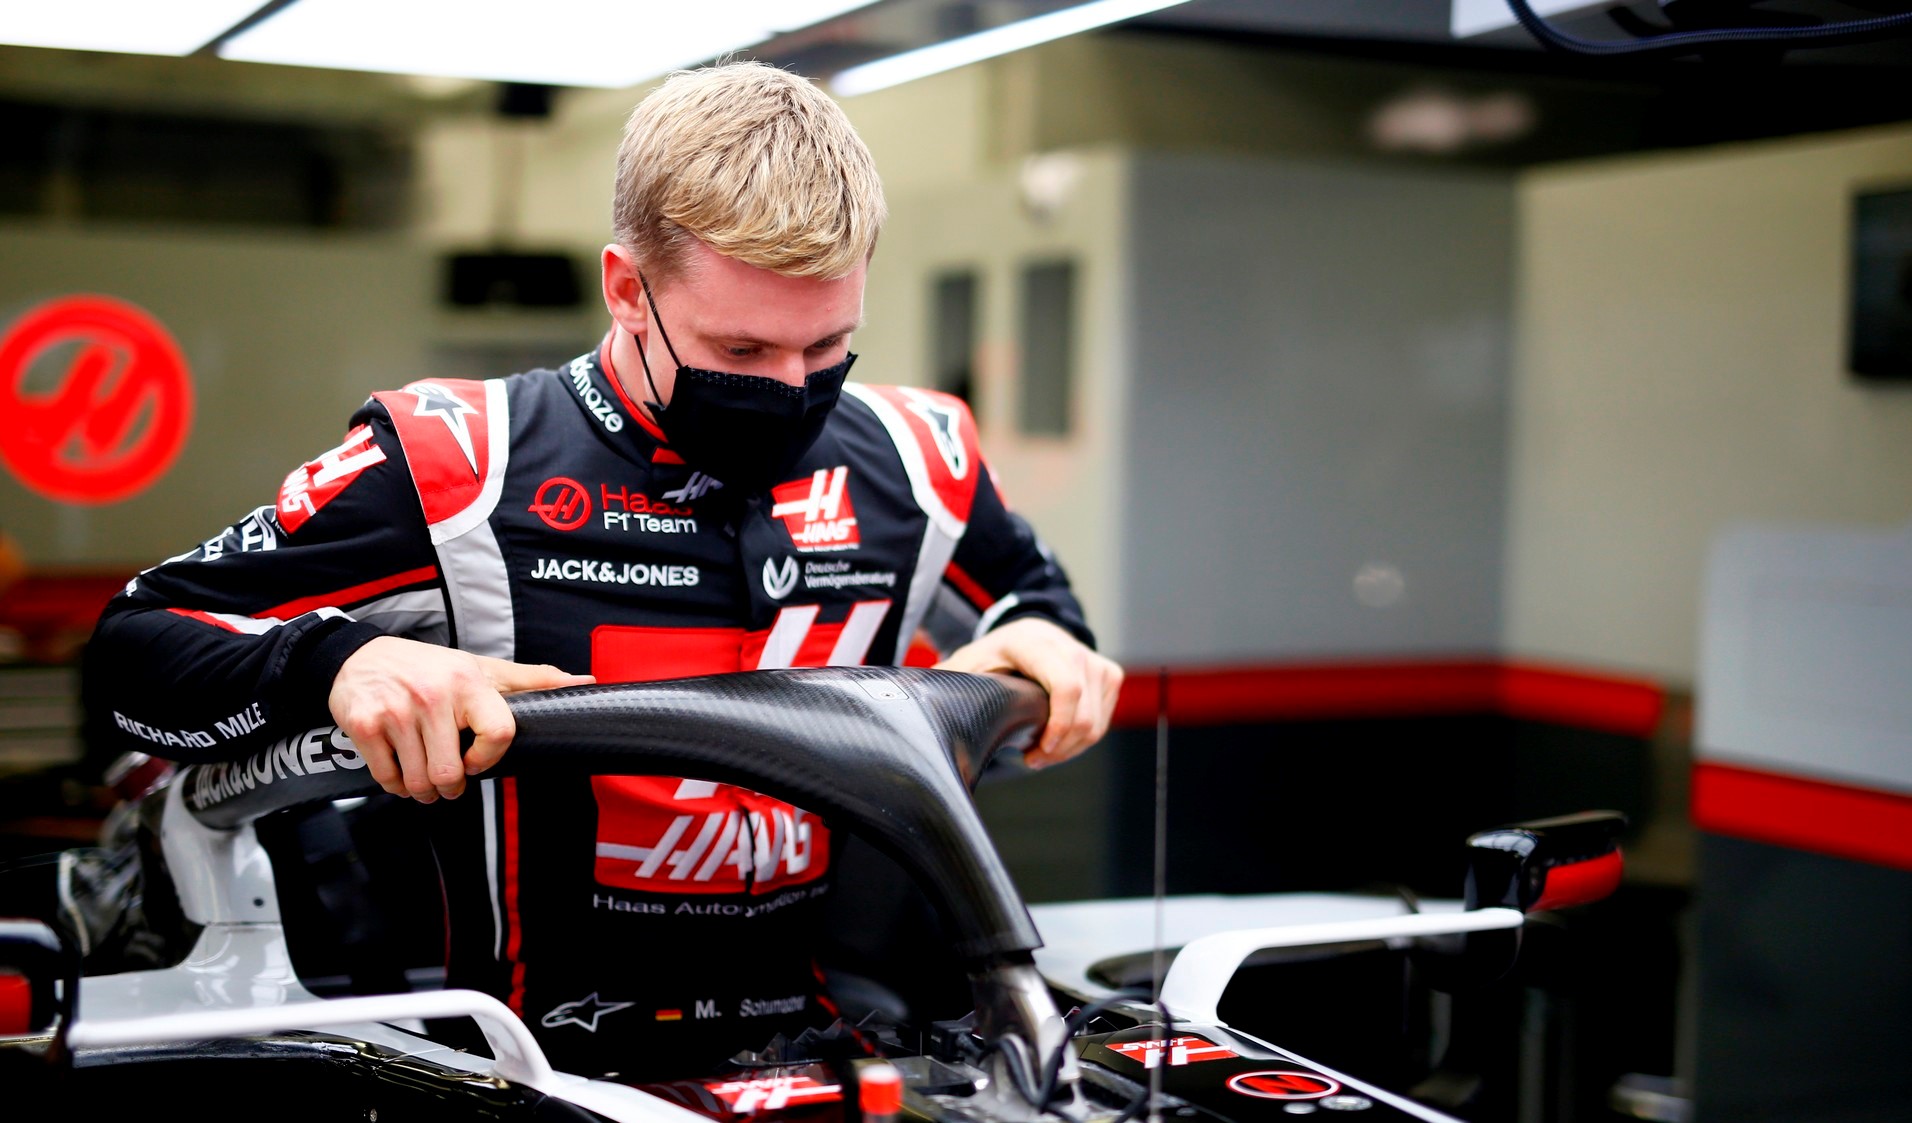 How will Mick Schumacher cope up with Mazepin as they will be Haas teammates?